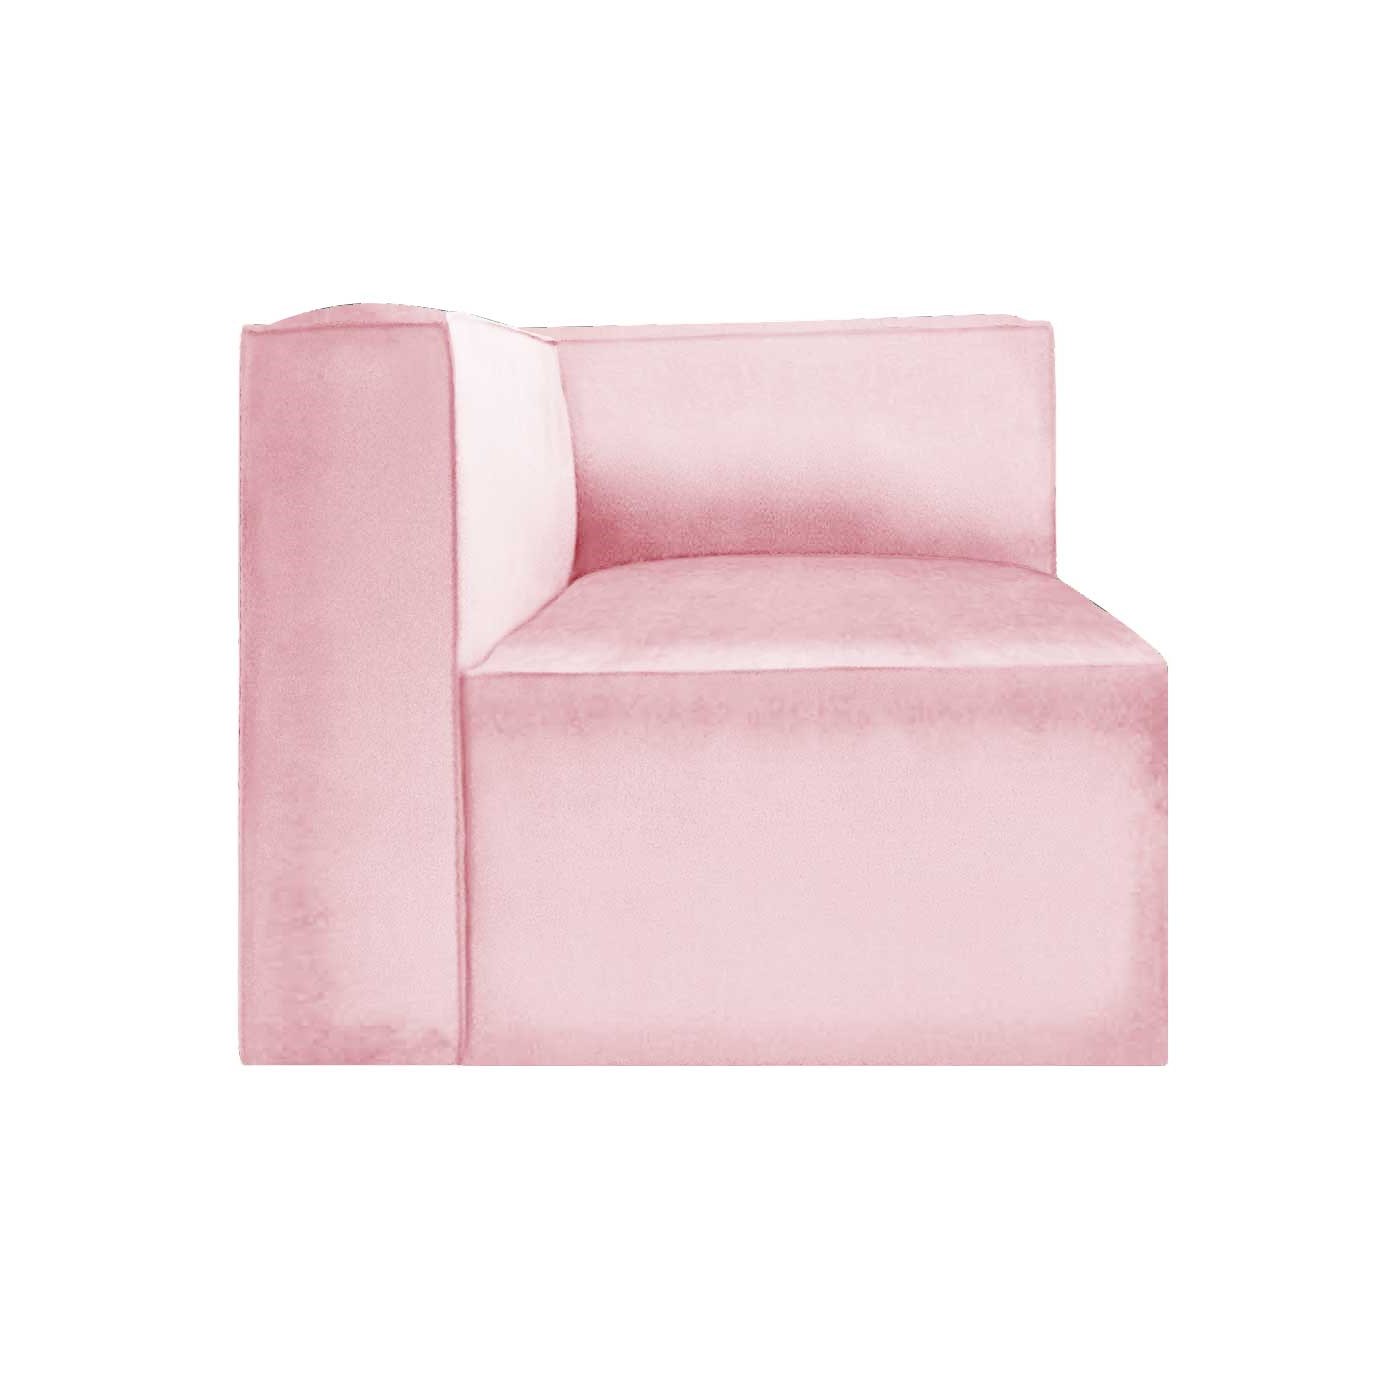 Malmo Pink Right Hand Corner Seater